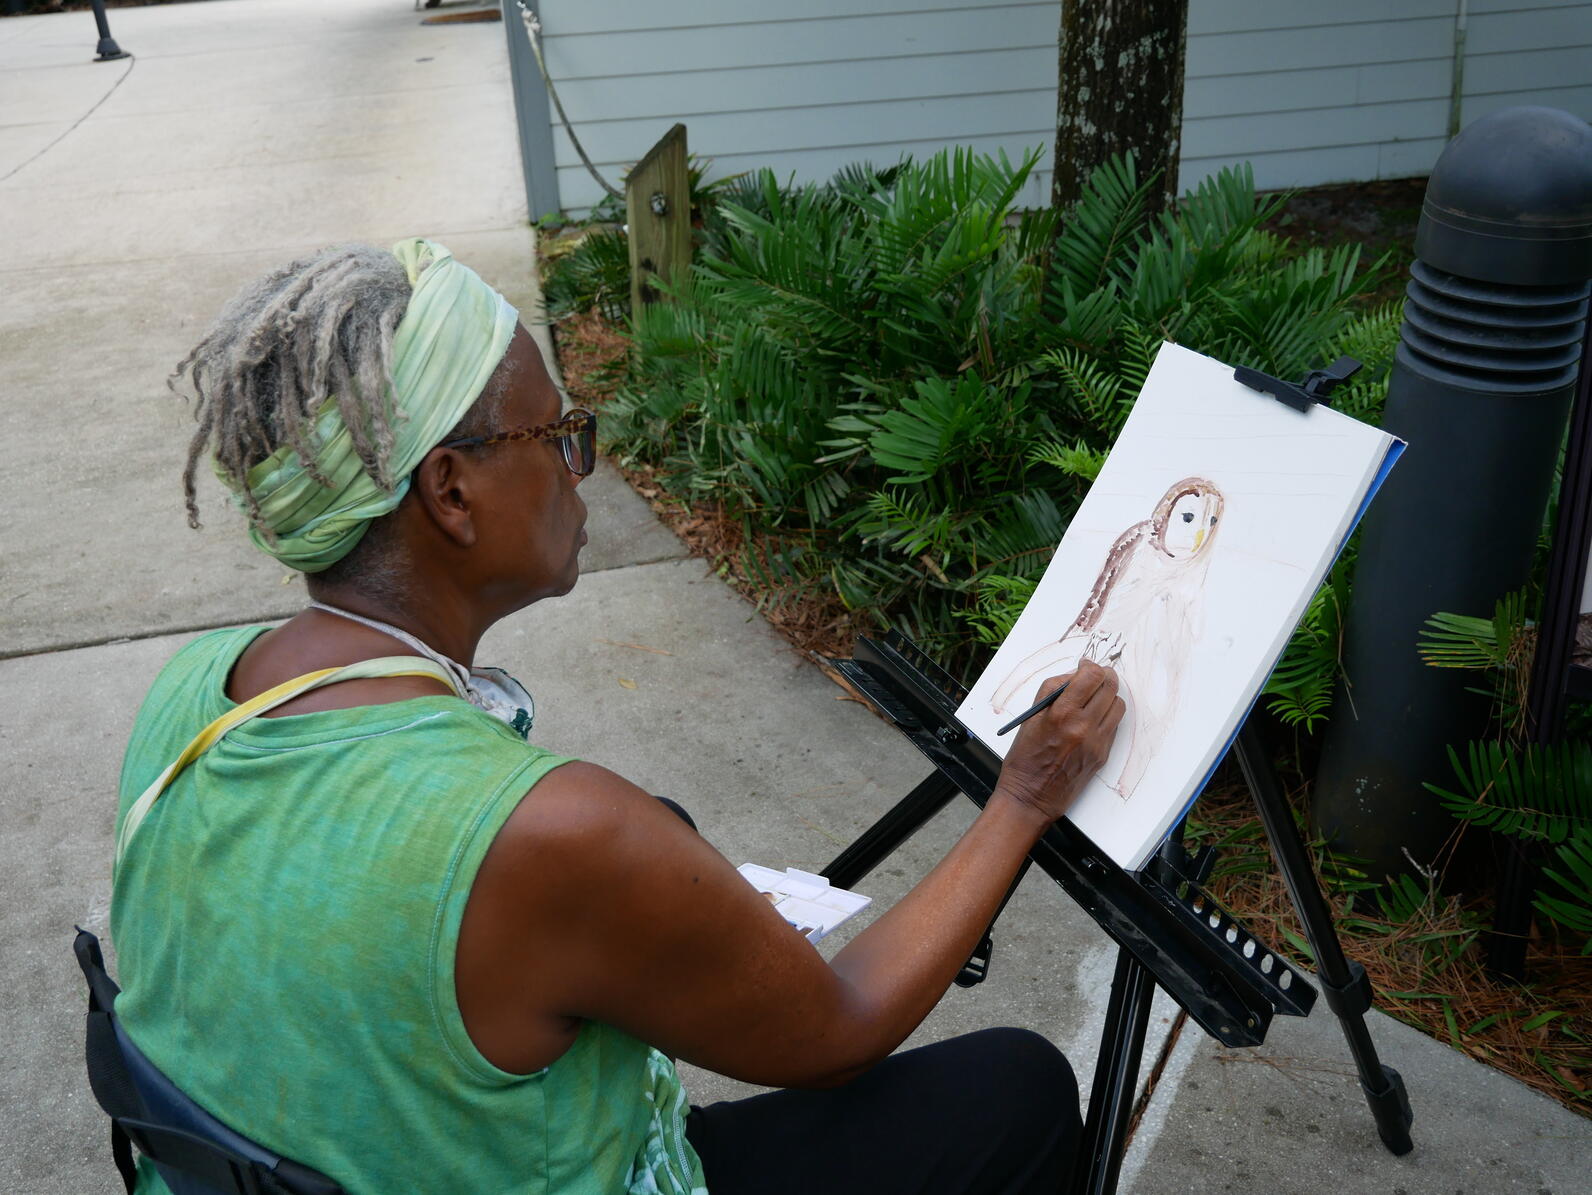 a woman sketching outdoors